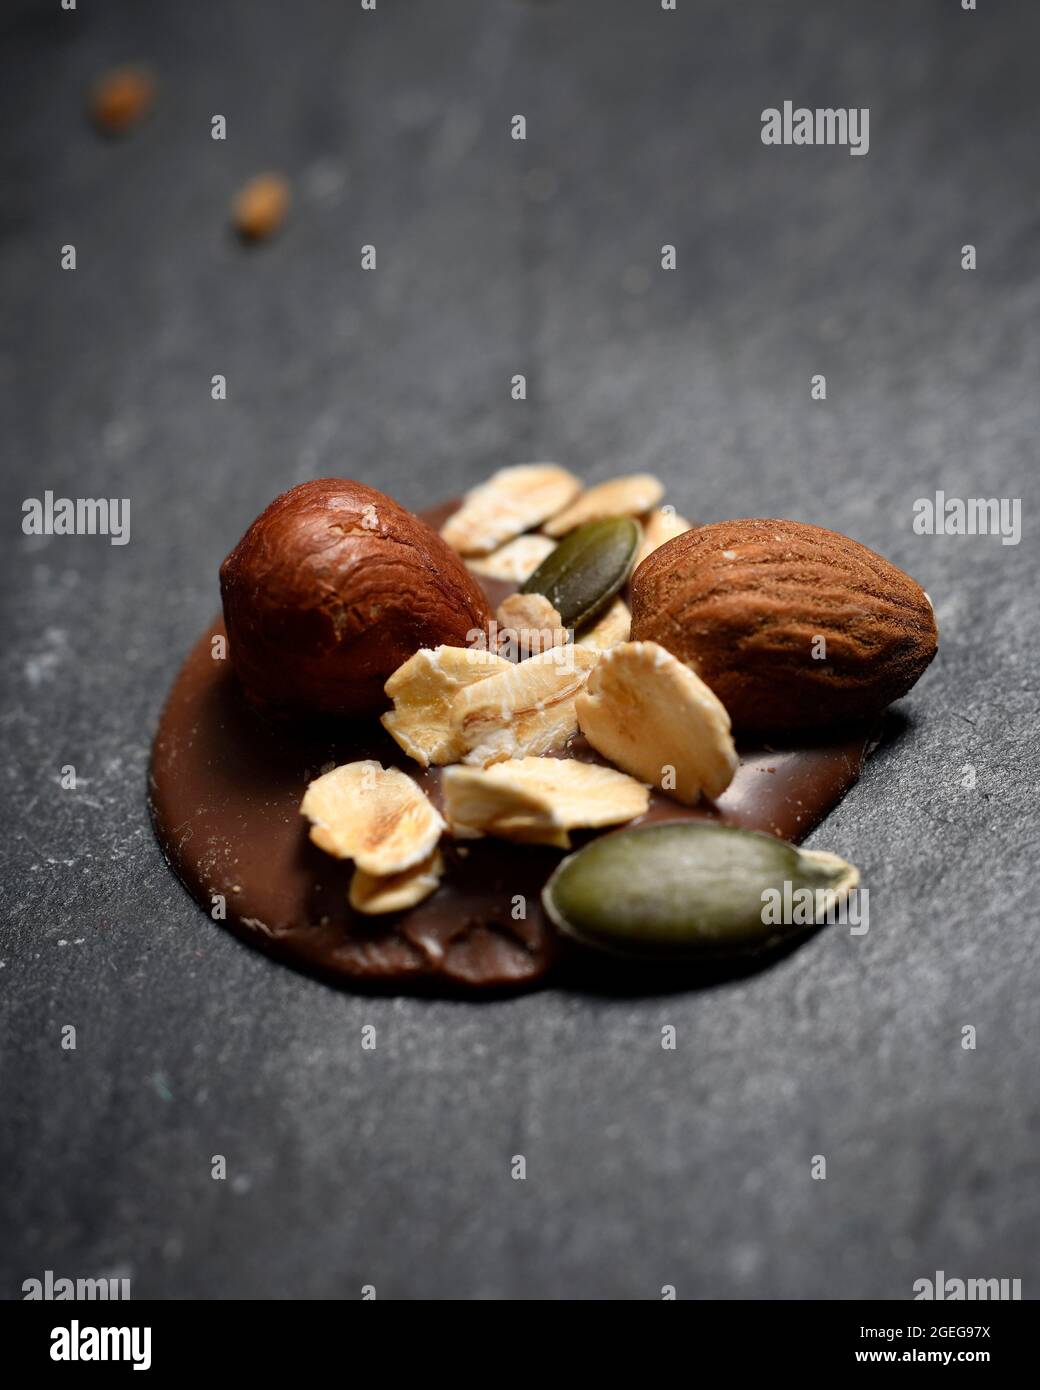 Mendiants, traditional French confections composed of a chocolate disk studded with nuts and dried fruits representing the four mendicant or monastic Stock Photo